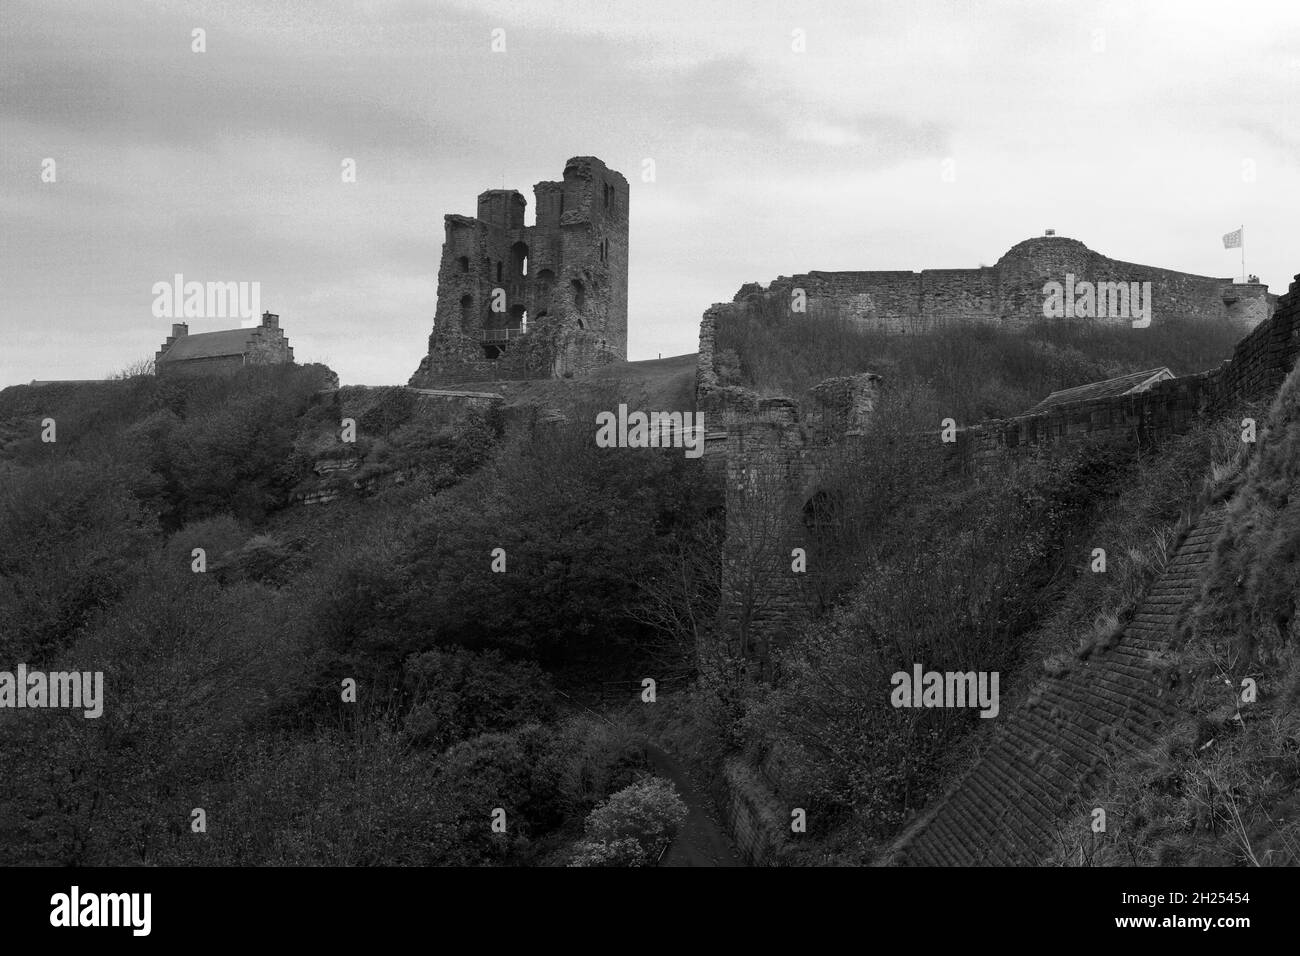 The Medieval ruins of Scarborough Castle, North Yorkshire, England, UK Stock Photo